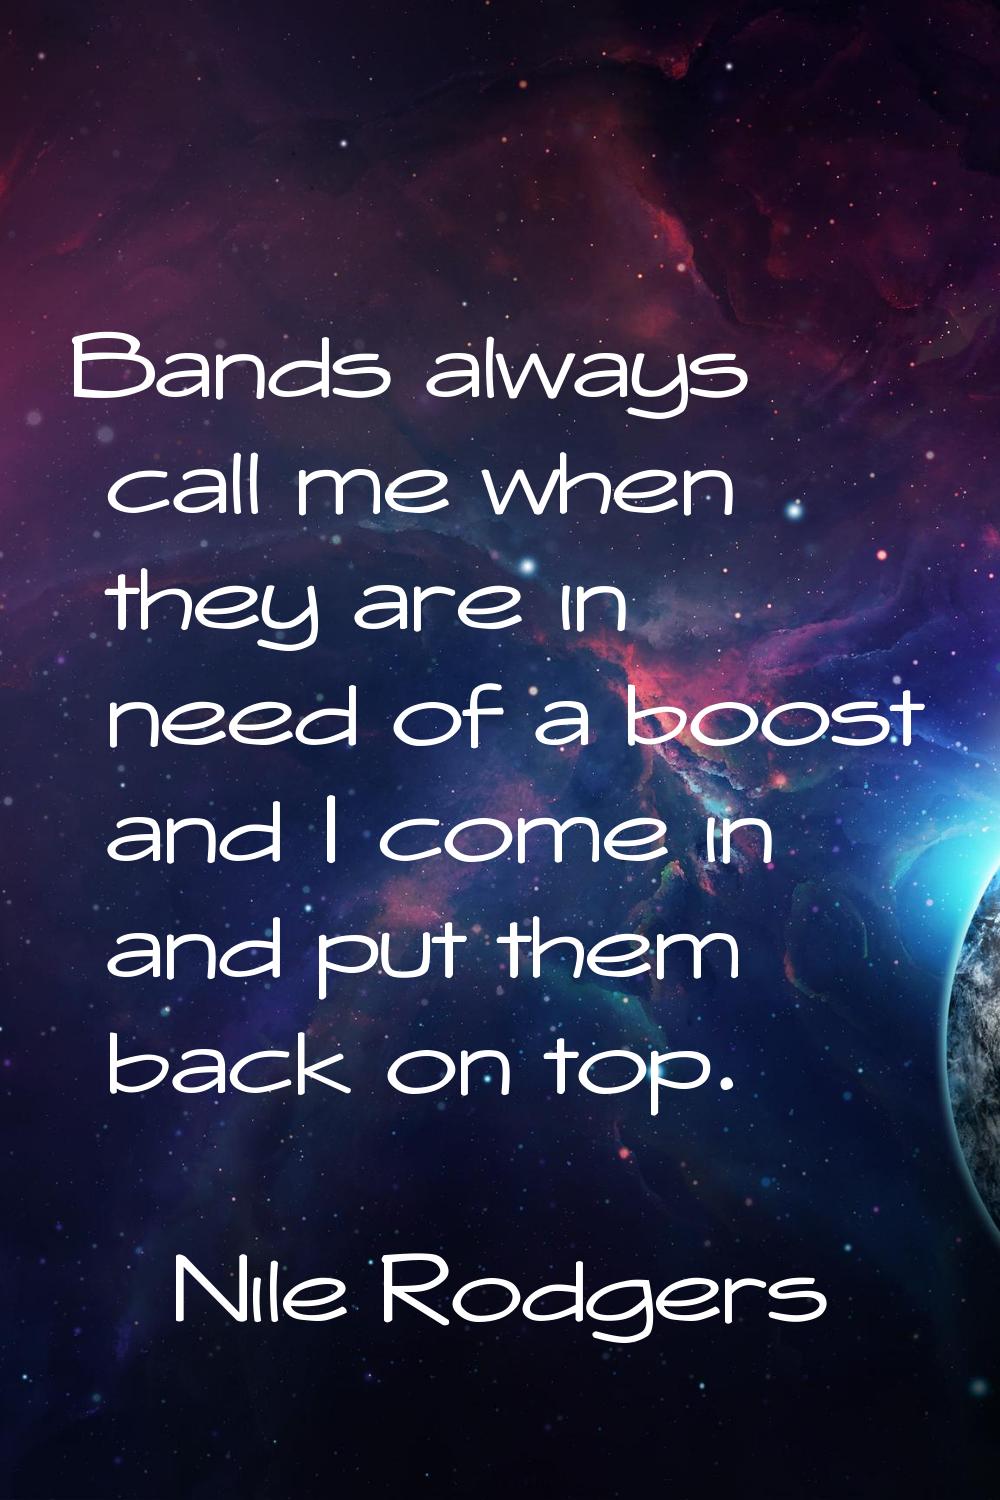 Bands always call me when they are in need of a boost and I come in and put them back on top.